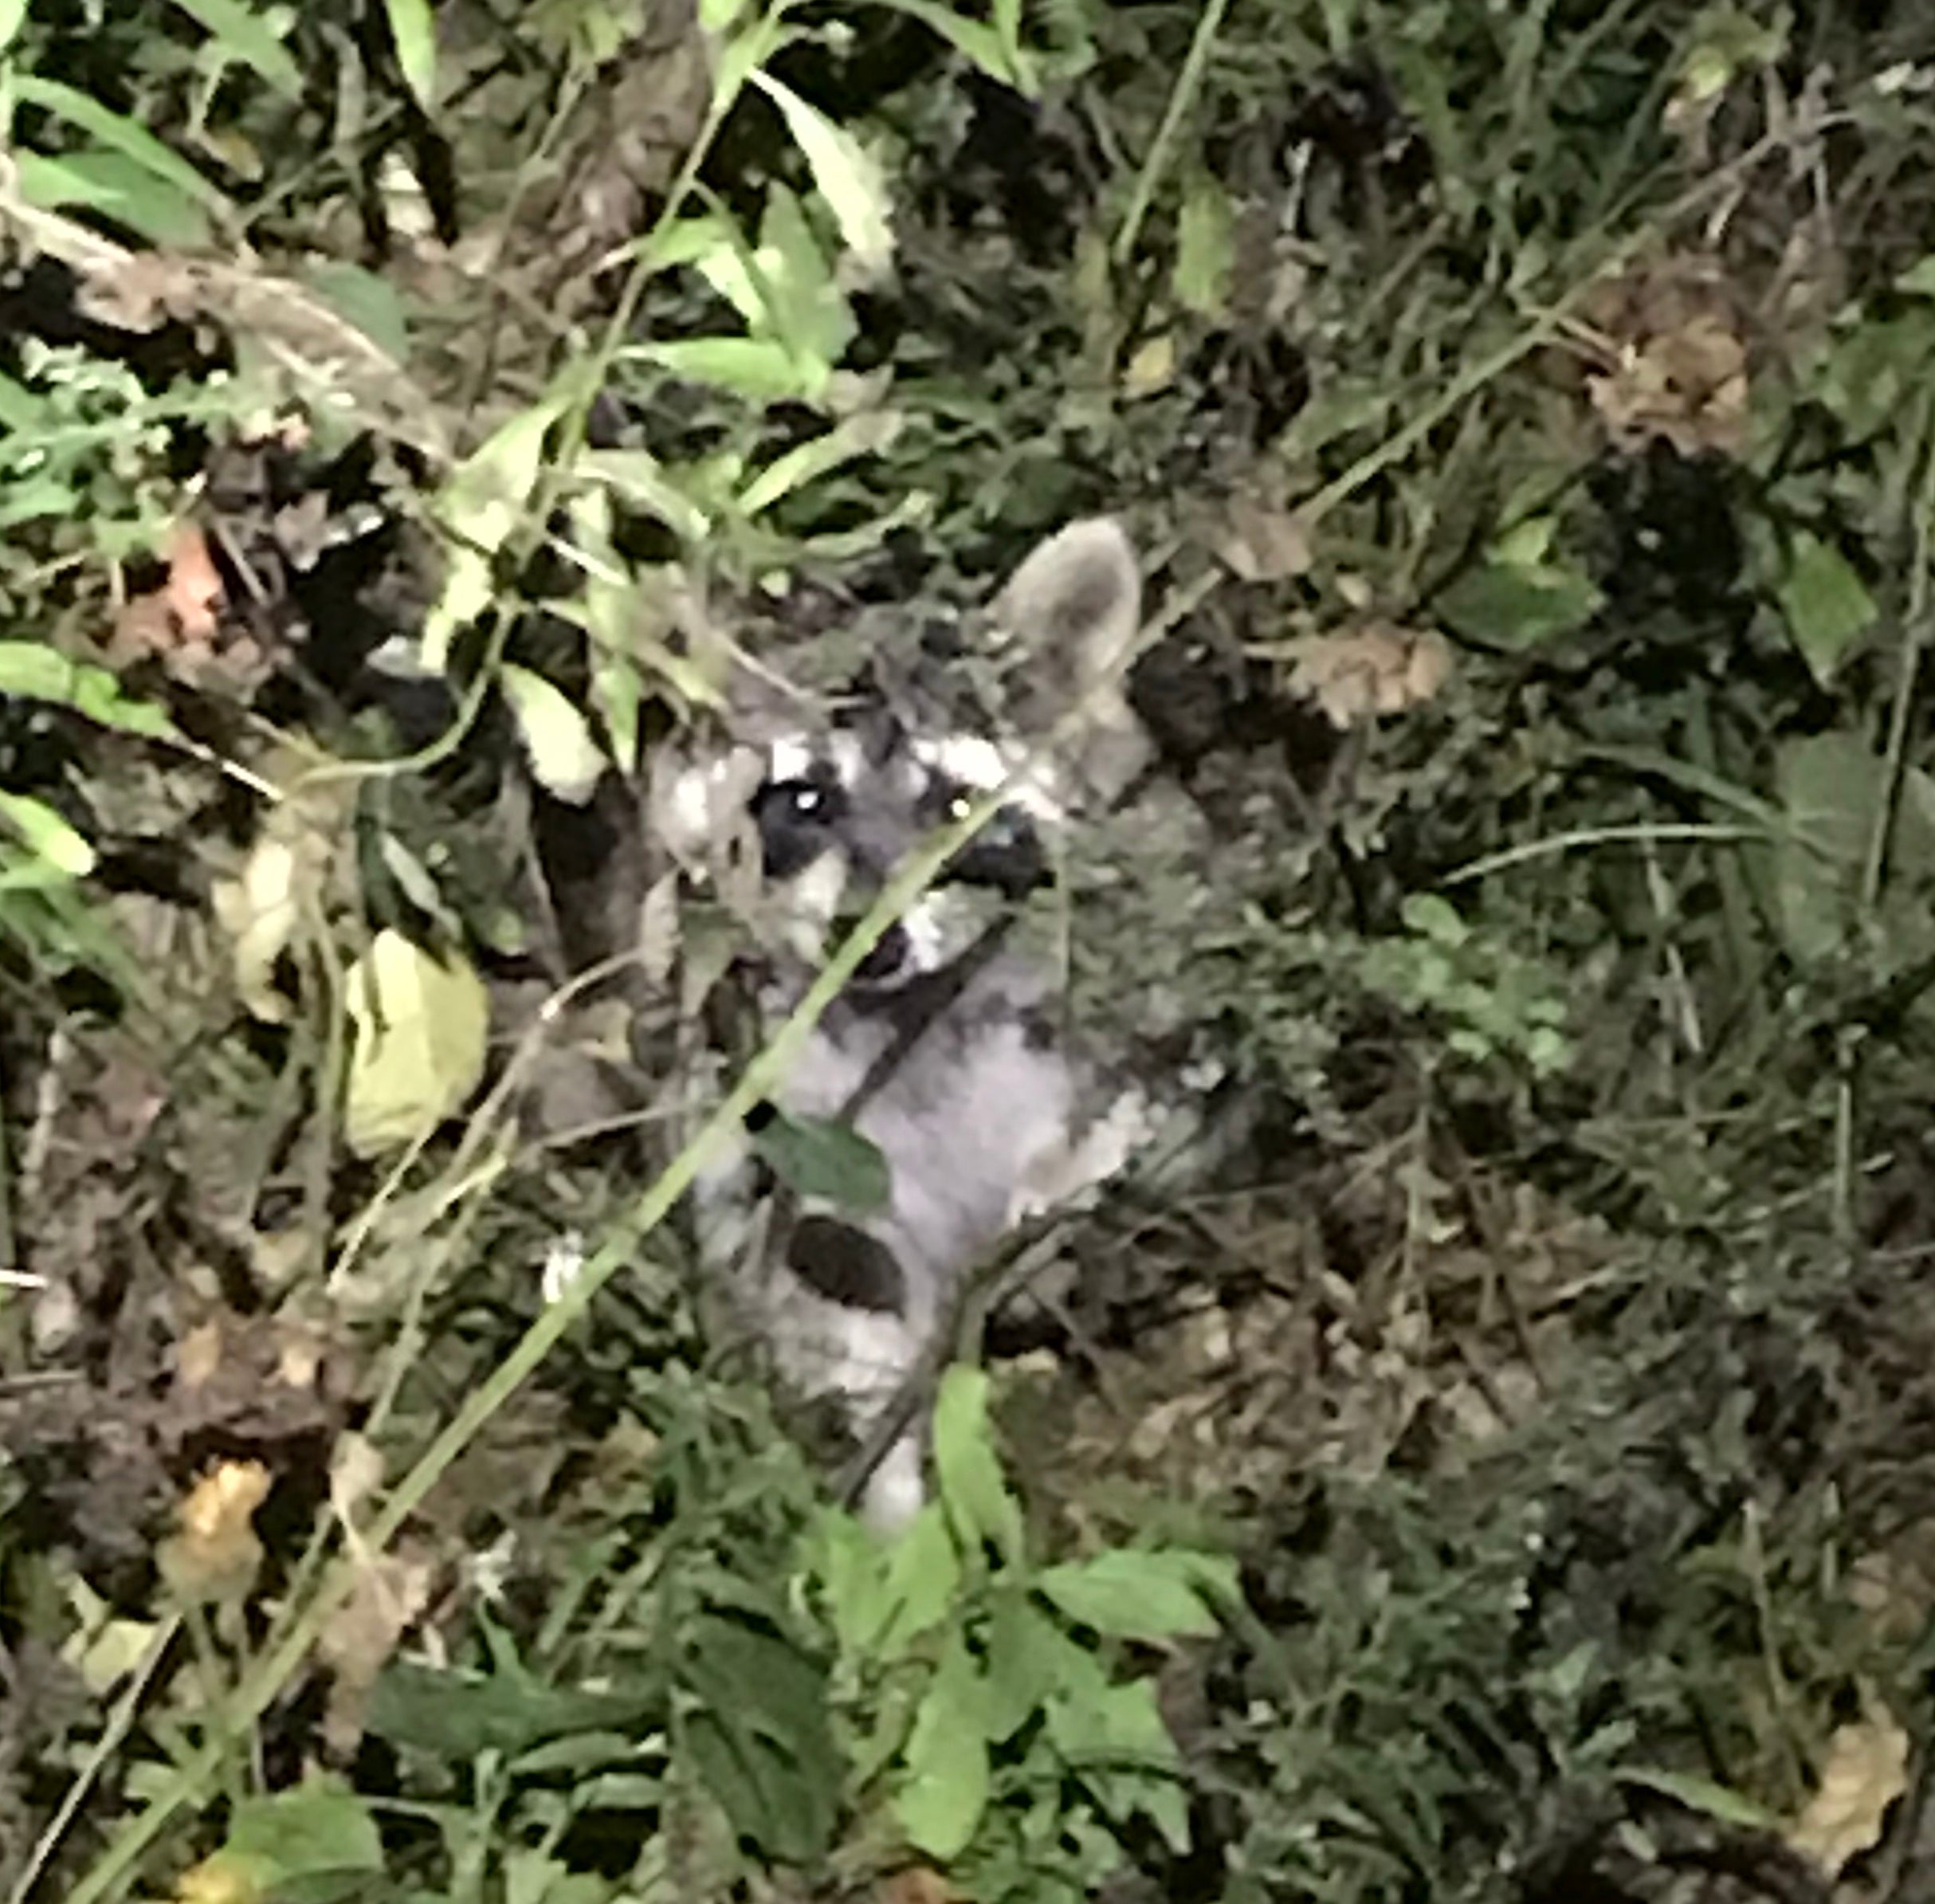 Thieving Banded Trash Panda had absolutely no fear...having to be scared off...only to return to paw around the exterior of the tent in the early evening.